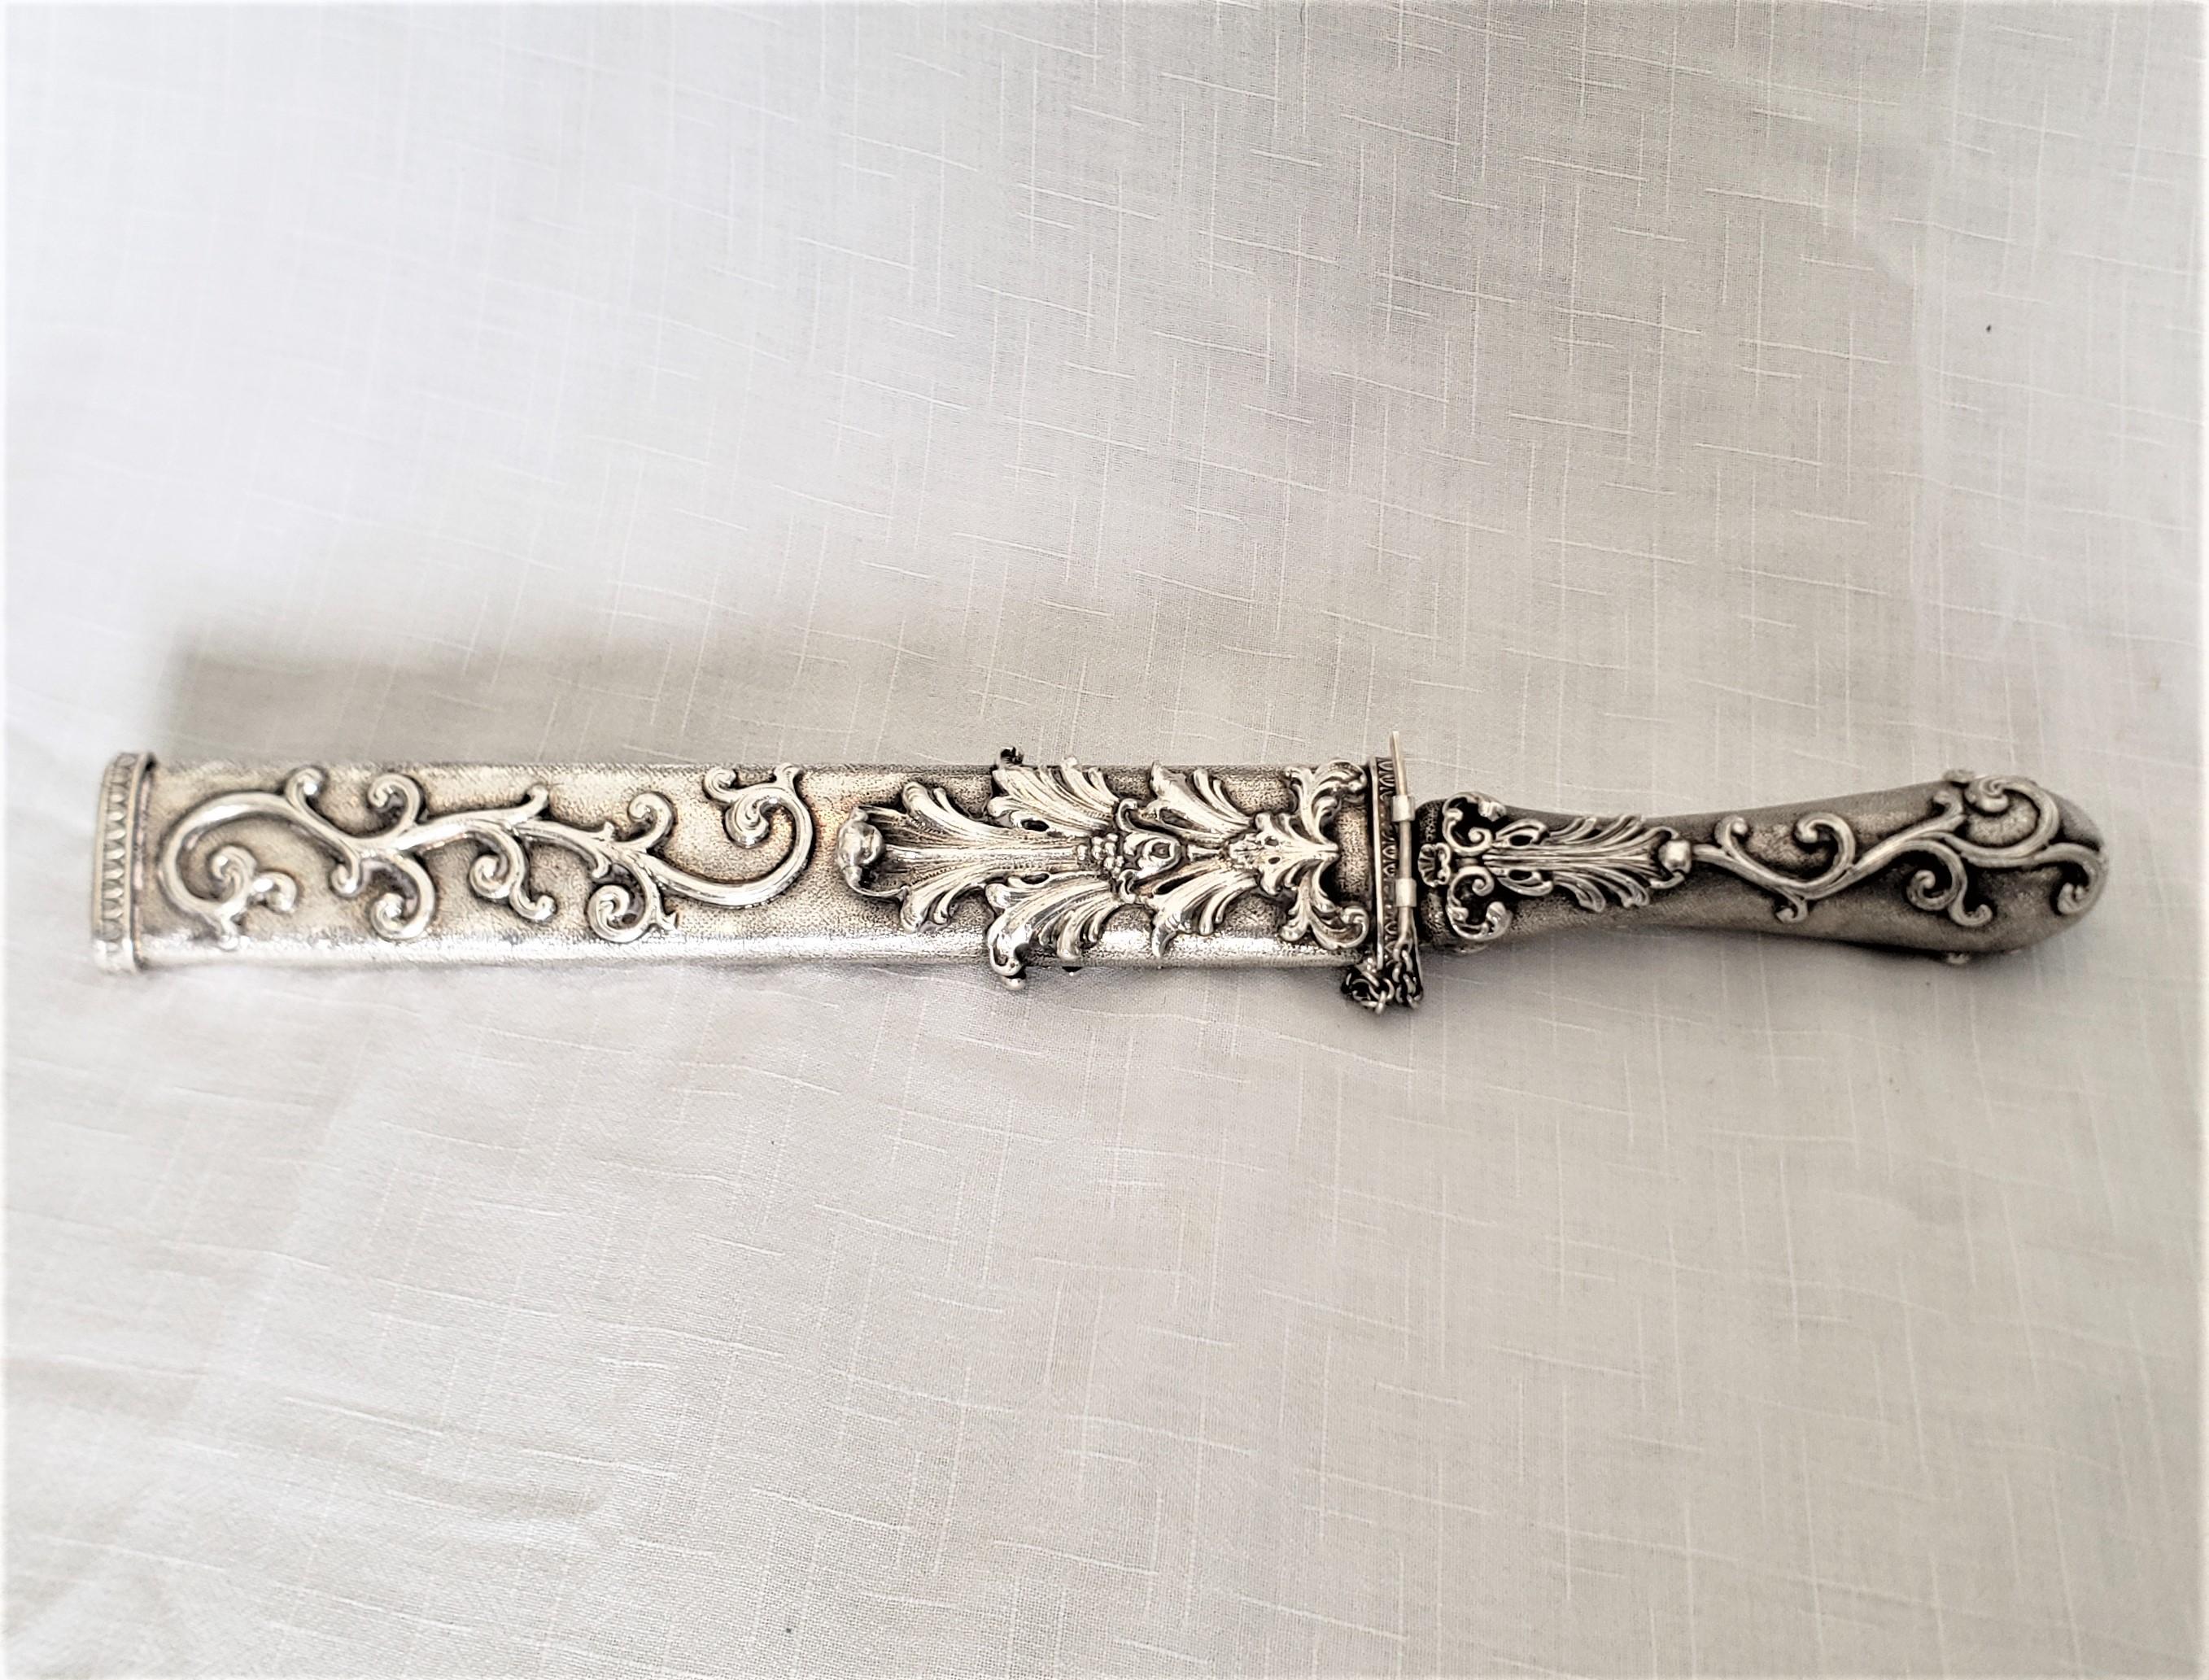 This antique styled Italian knife and scabbard set was made as part of the Vera Jardin Collection, and dates to approximately 1920-60 and done in a Renaissance Revival style. The set is highly decorative and may have been produced as a letter opener